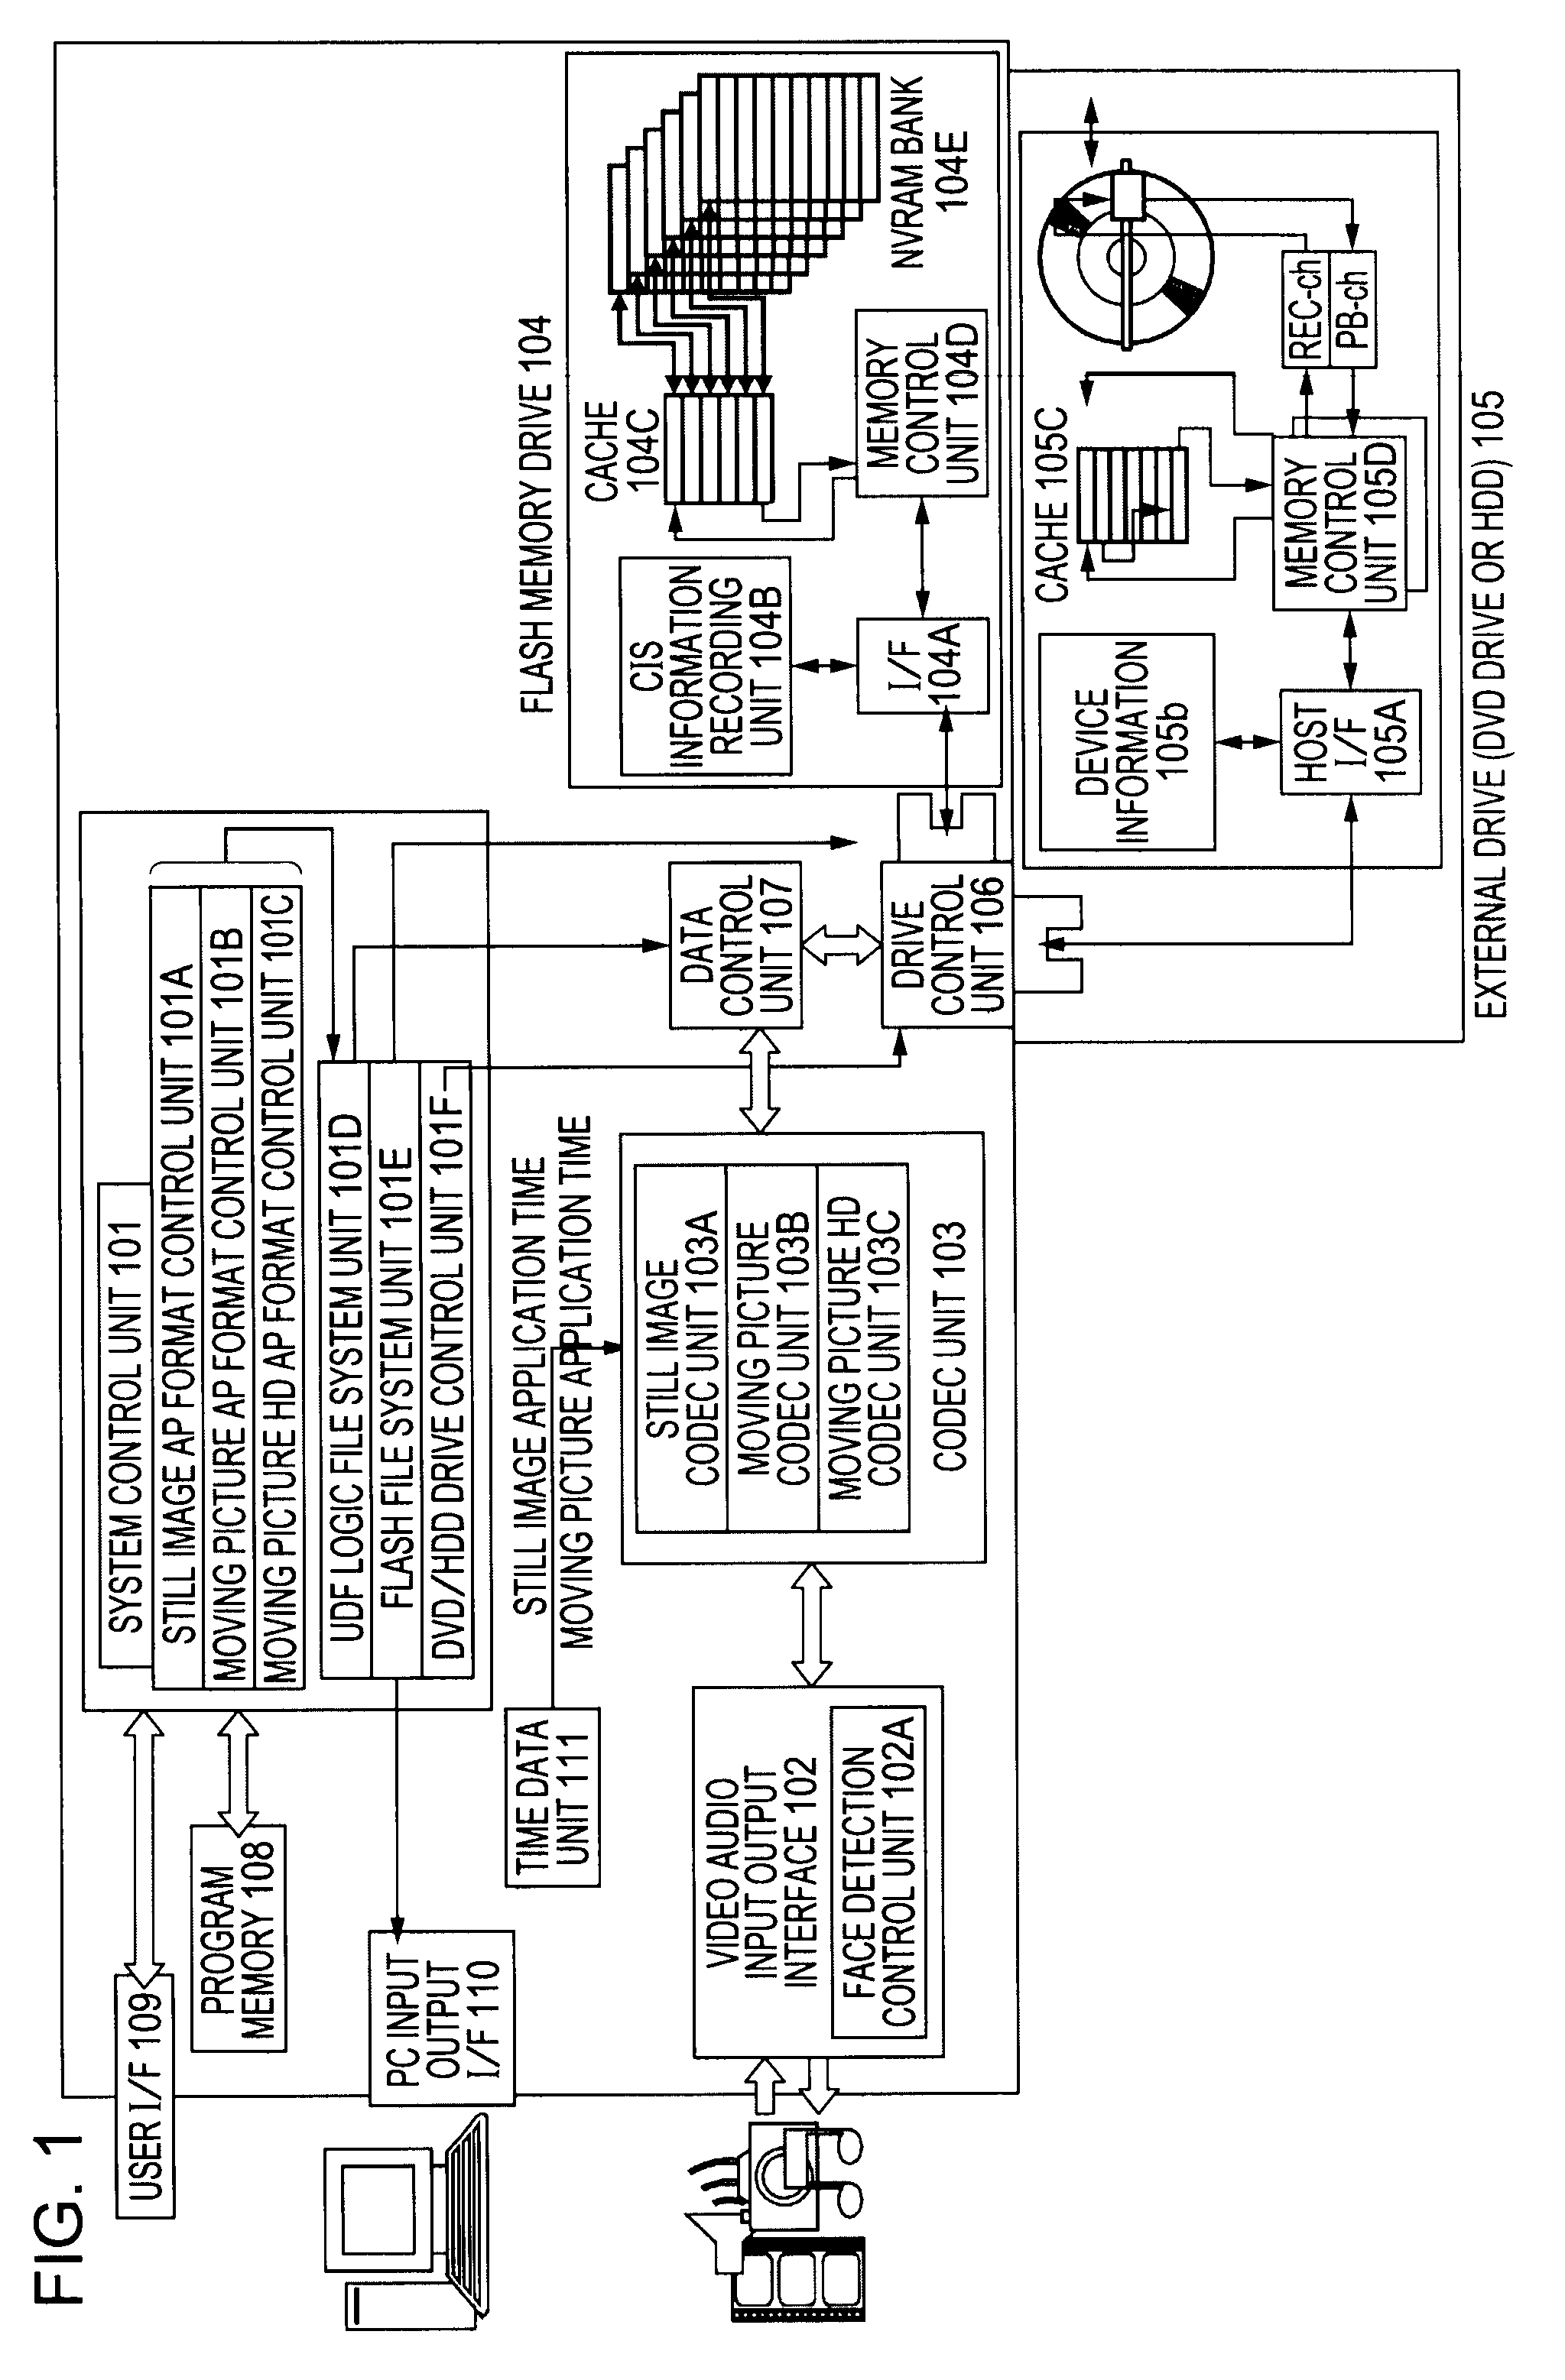 Video reproduction apparatus and video reproduction method